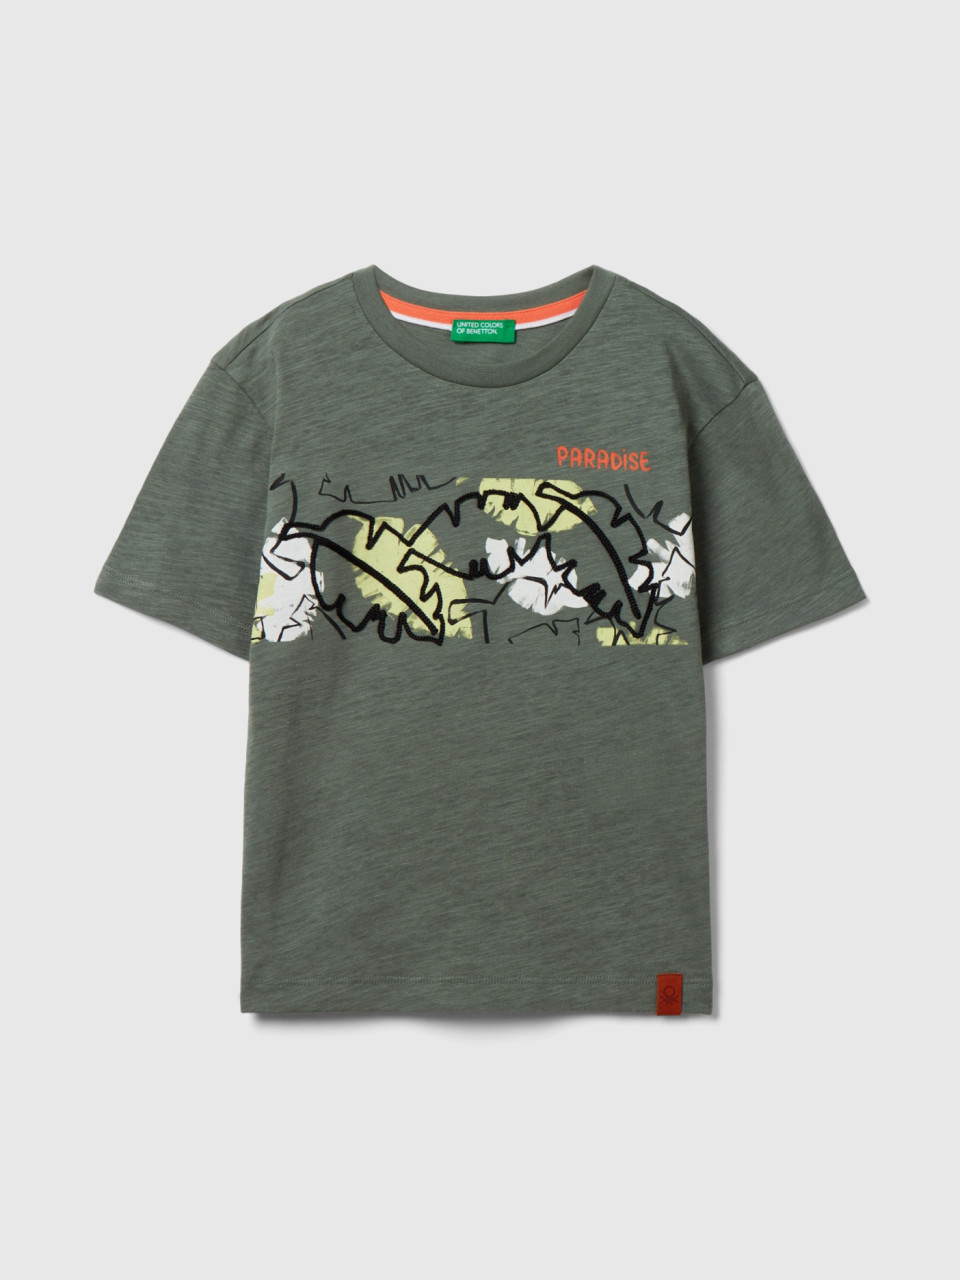 Benetton, T-shirt With Exotic Print, Military Green, Kids